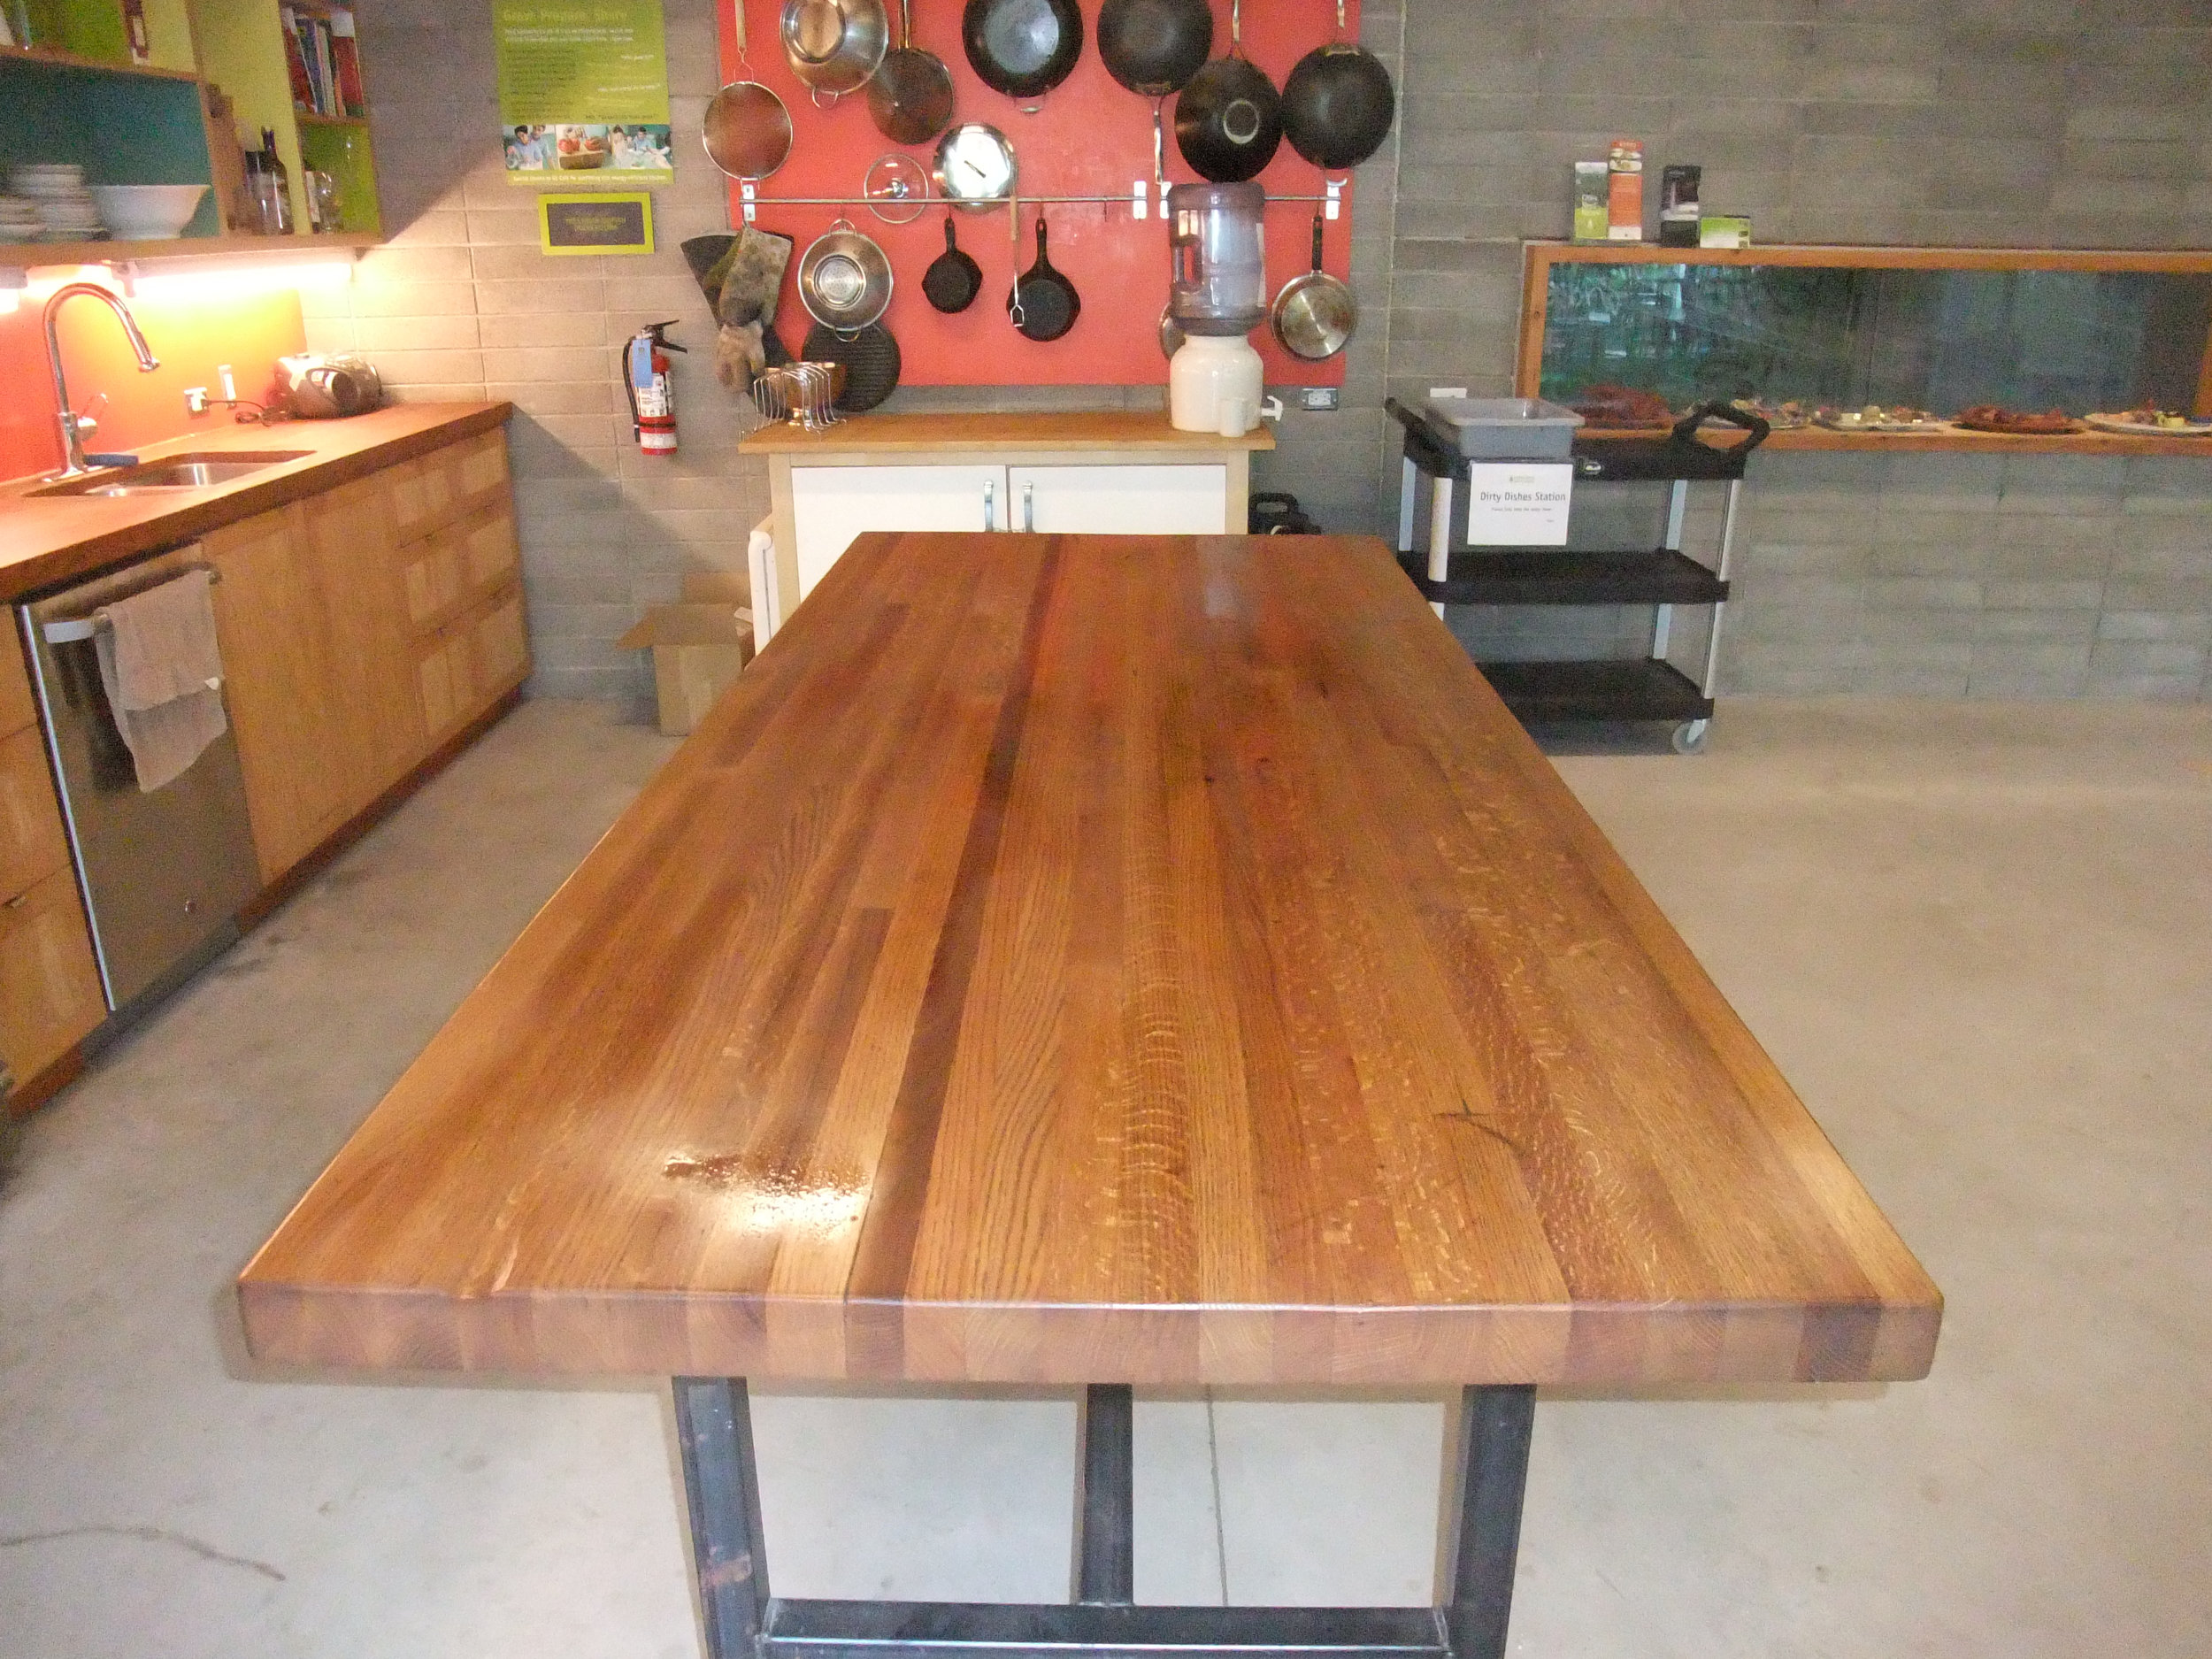 BeReclaimed - Reclaimed Wood Table - Oak from Pearson Airport with Custom Welded Steel Frame at Evergreen Brick Works.jpg